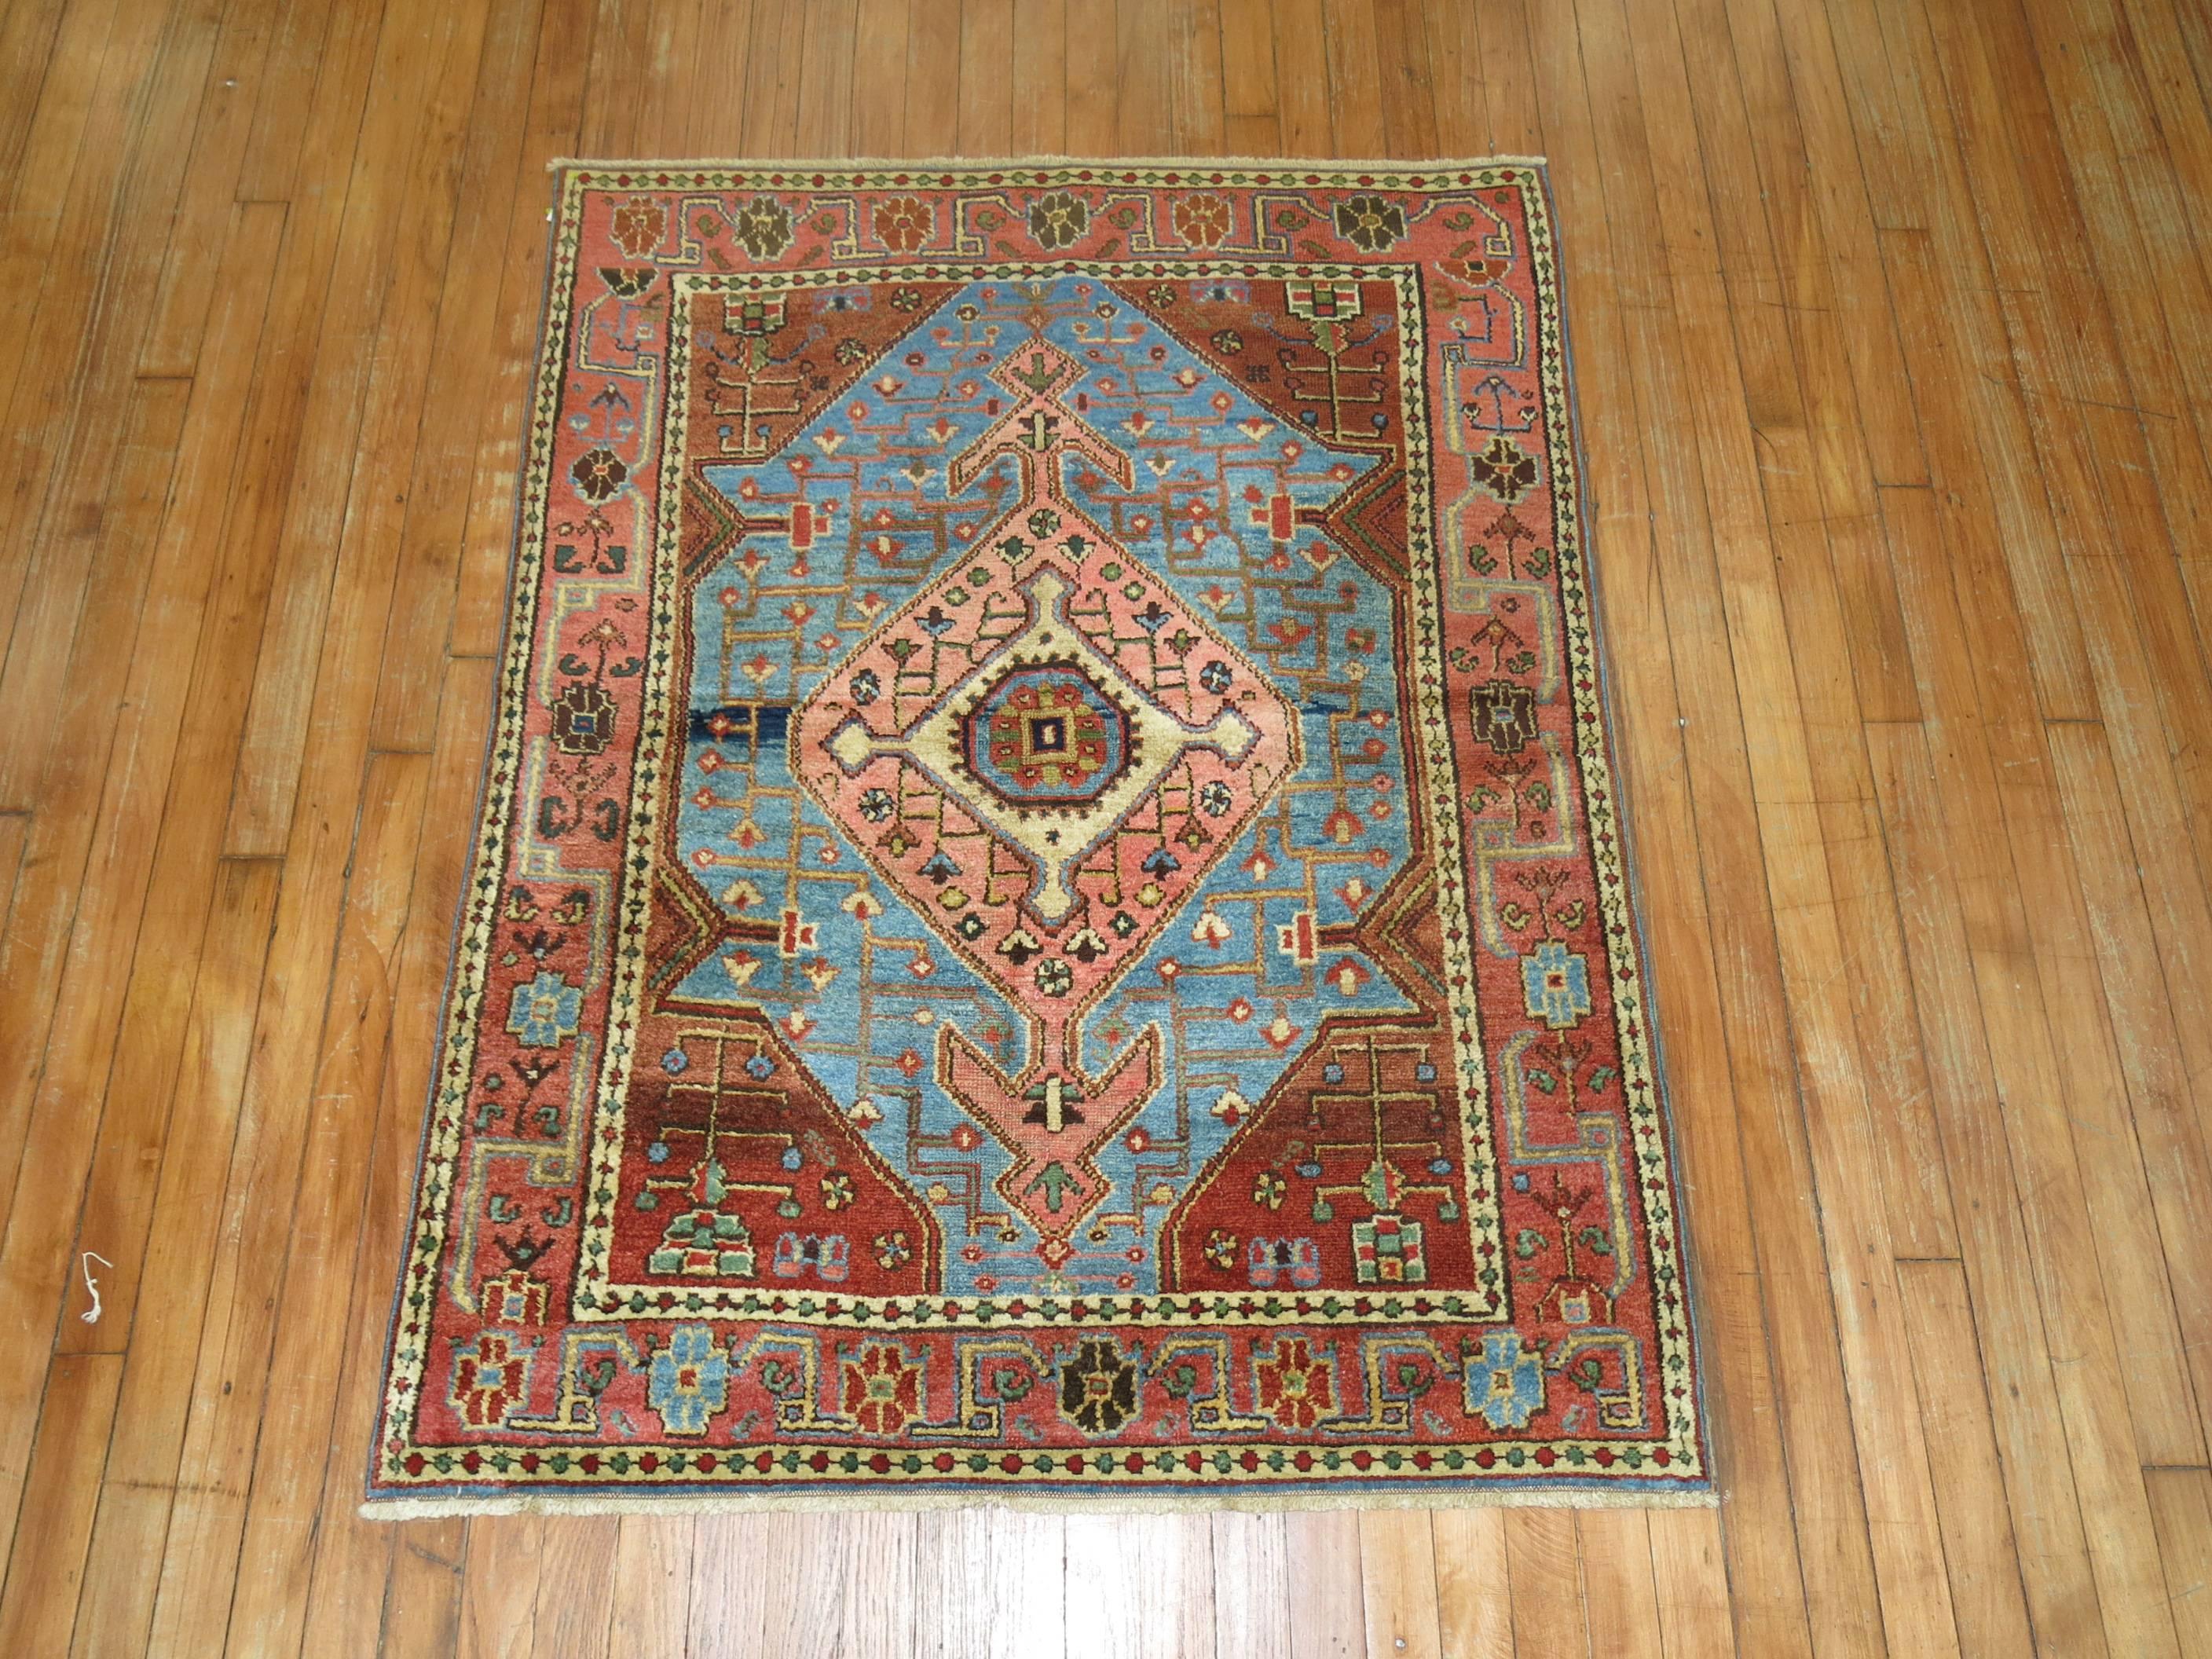 Pretty vintage decorative Persian rug from Hamadan village located in northwest Persian. Nice sky blue, rust and pink tones too. A nice contrast of colors and balance on a traditional motif, circa 1930.

Measures: 3'5' x 4'5”.